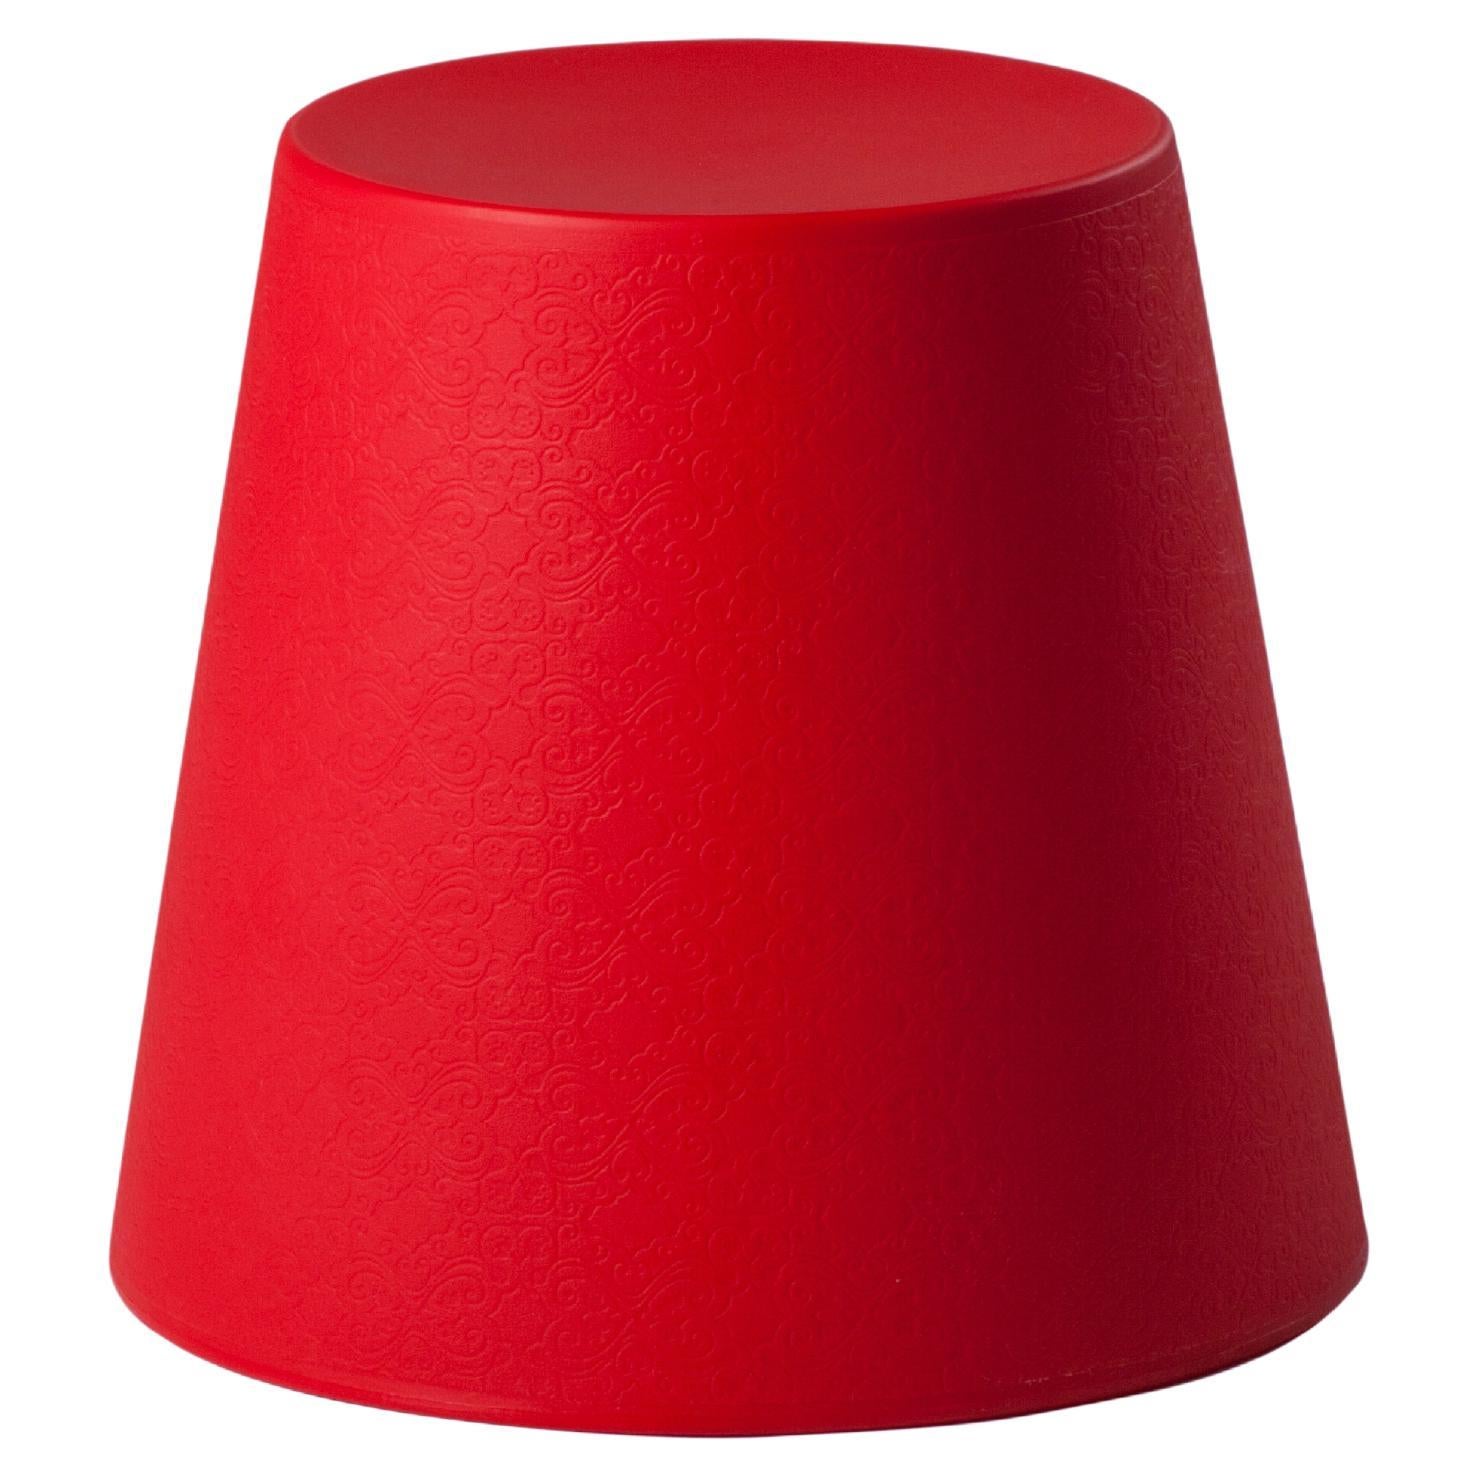 Slide Design Ali Baba Stool in Flame Red by Giò Colonna Romano